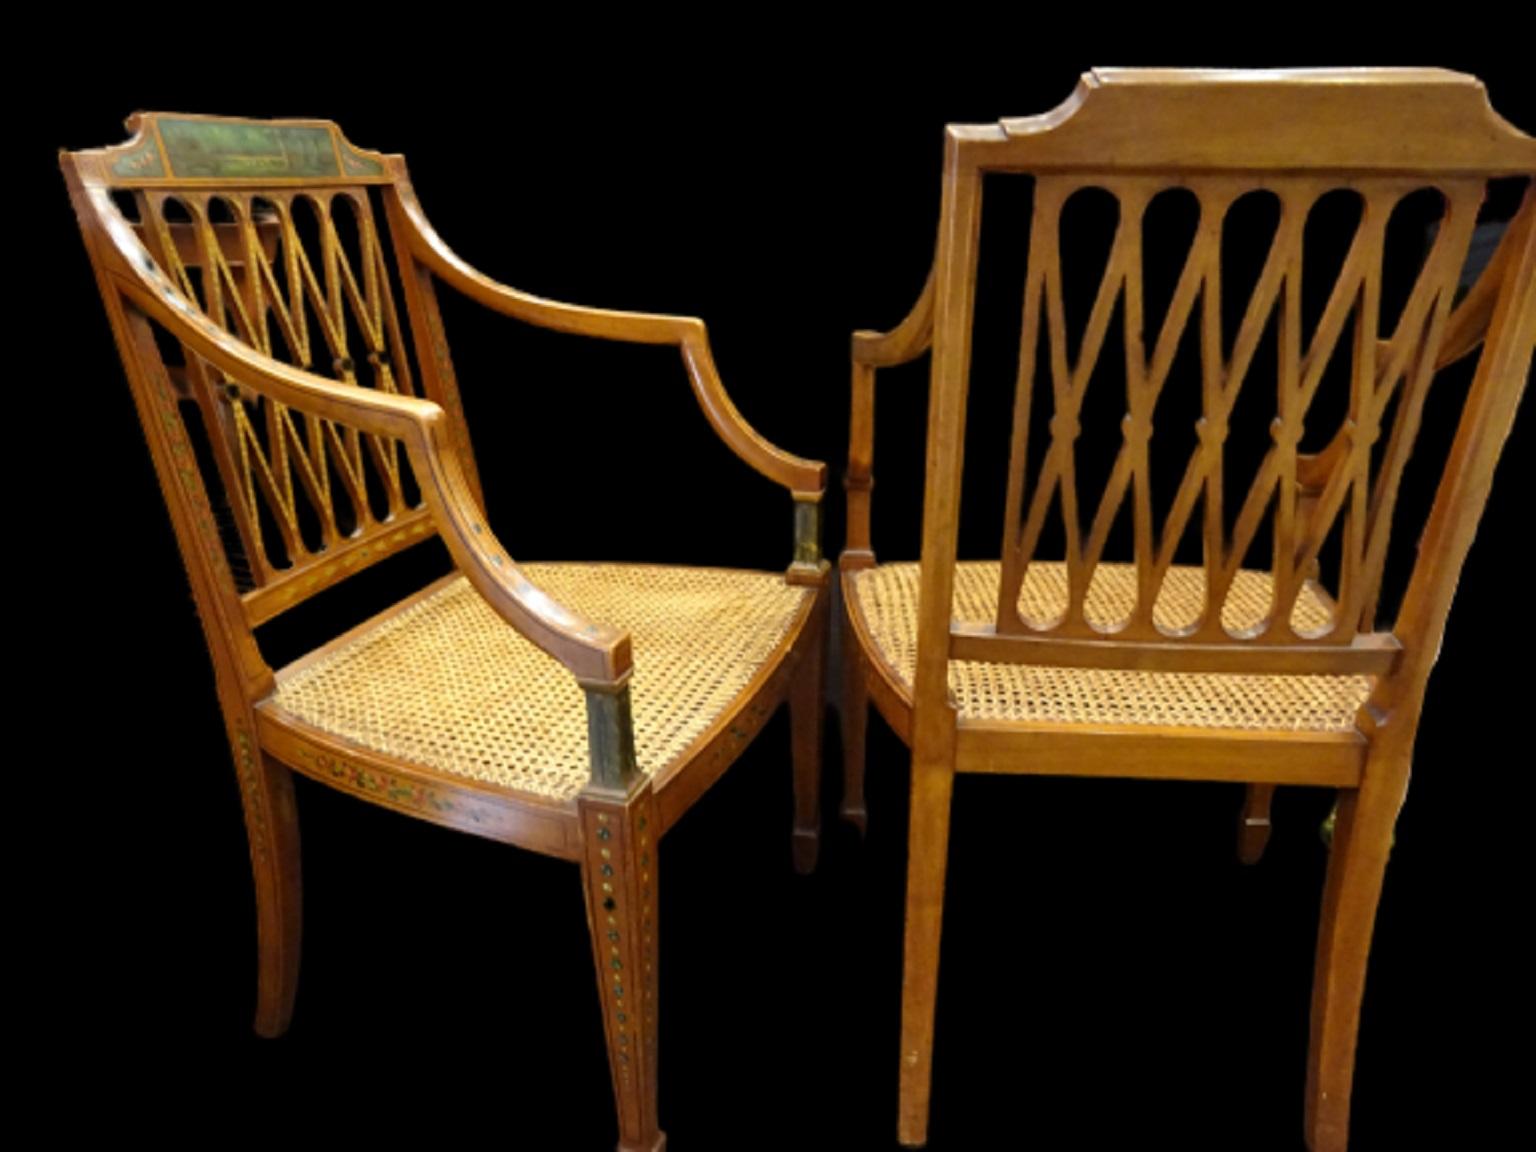 Sheraton English Pair of armchairs, Painted Satinwood  Inlaid Wood, Meashseat  3